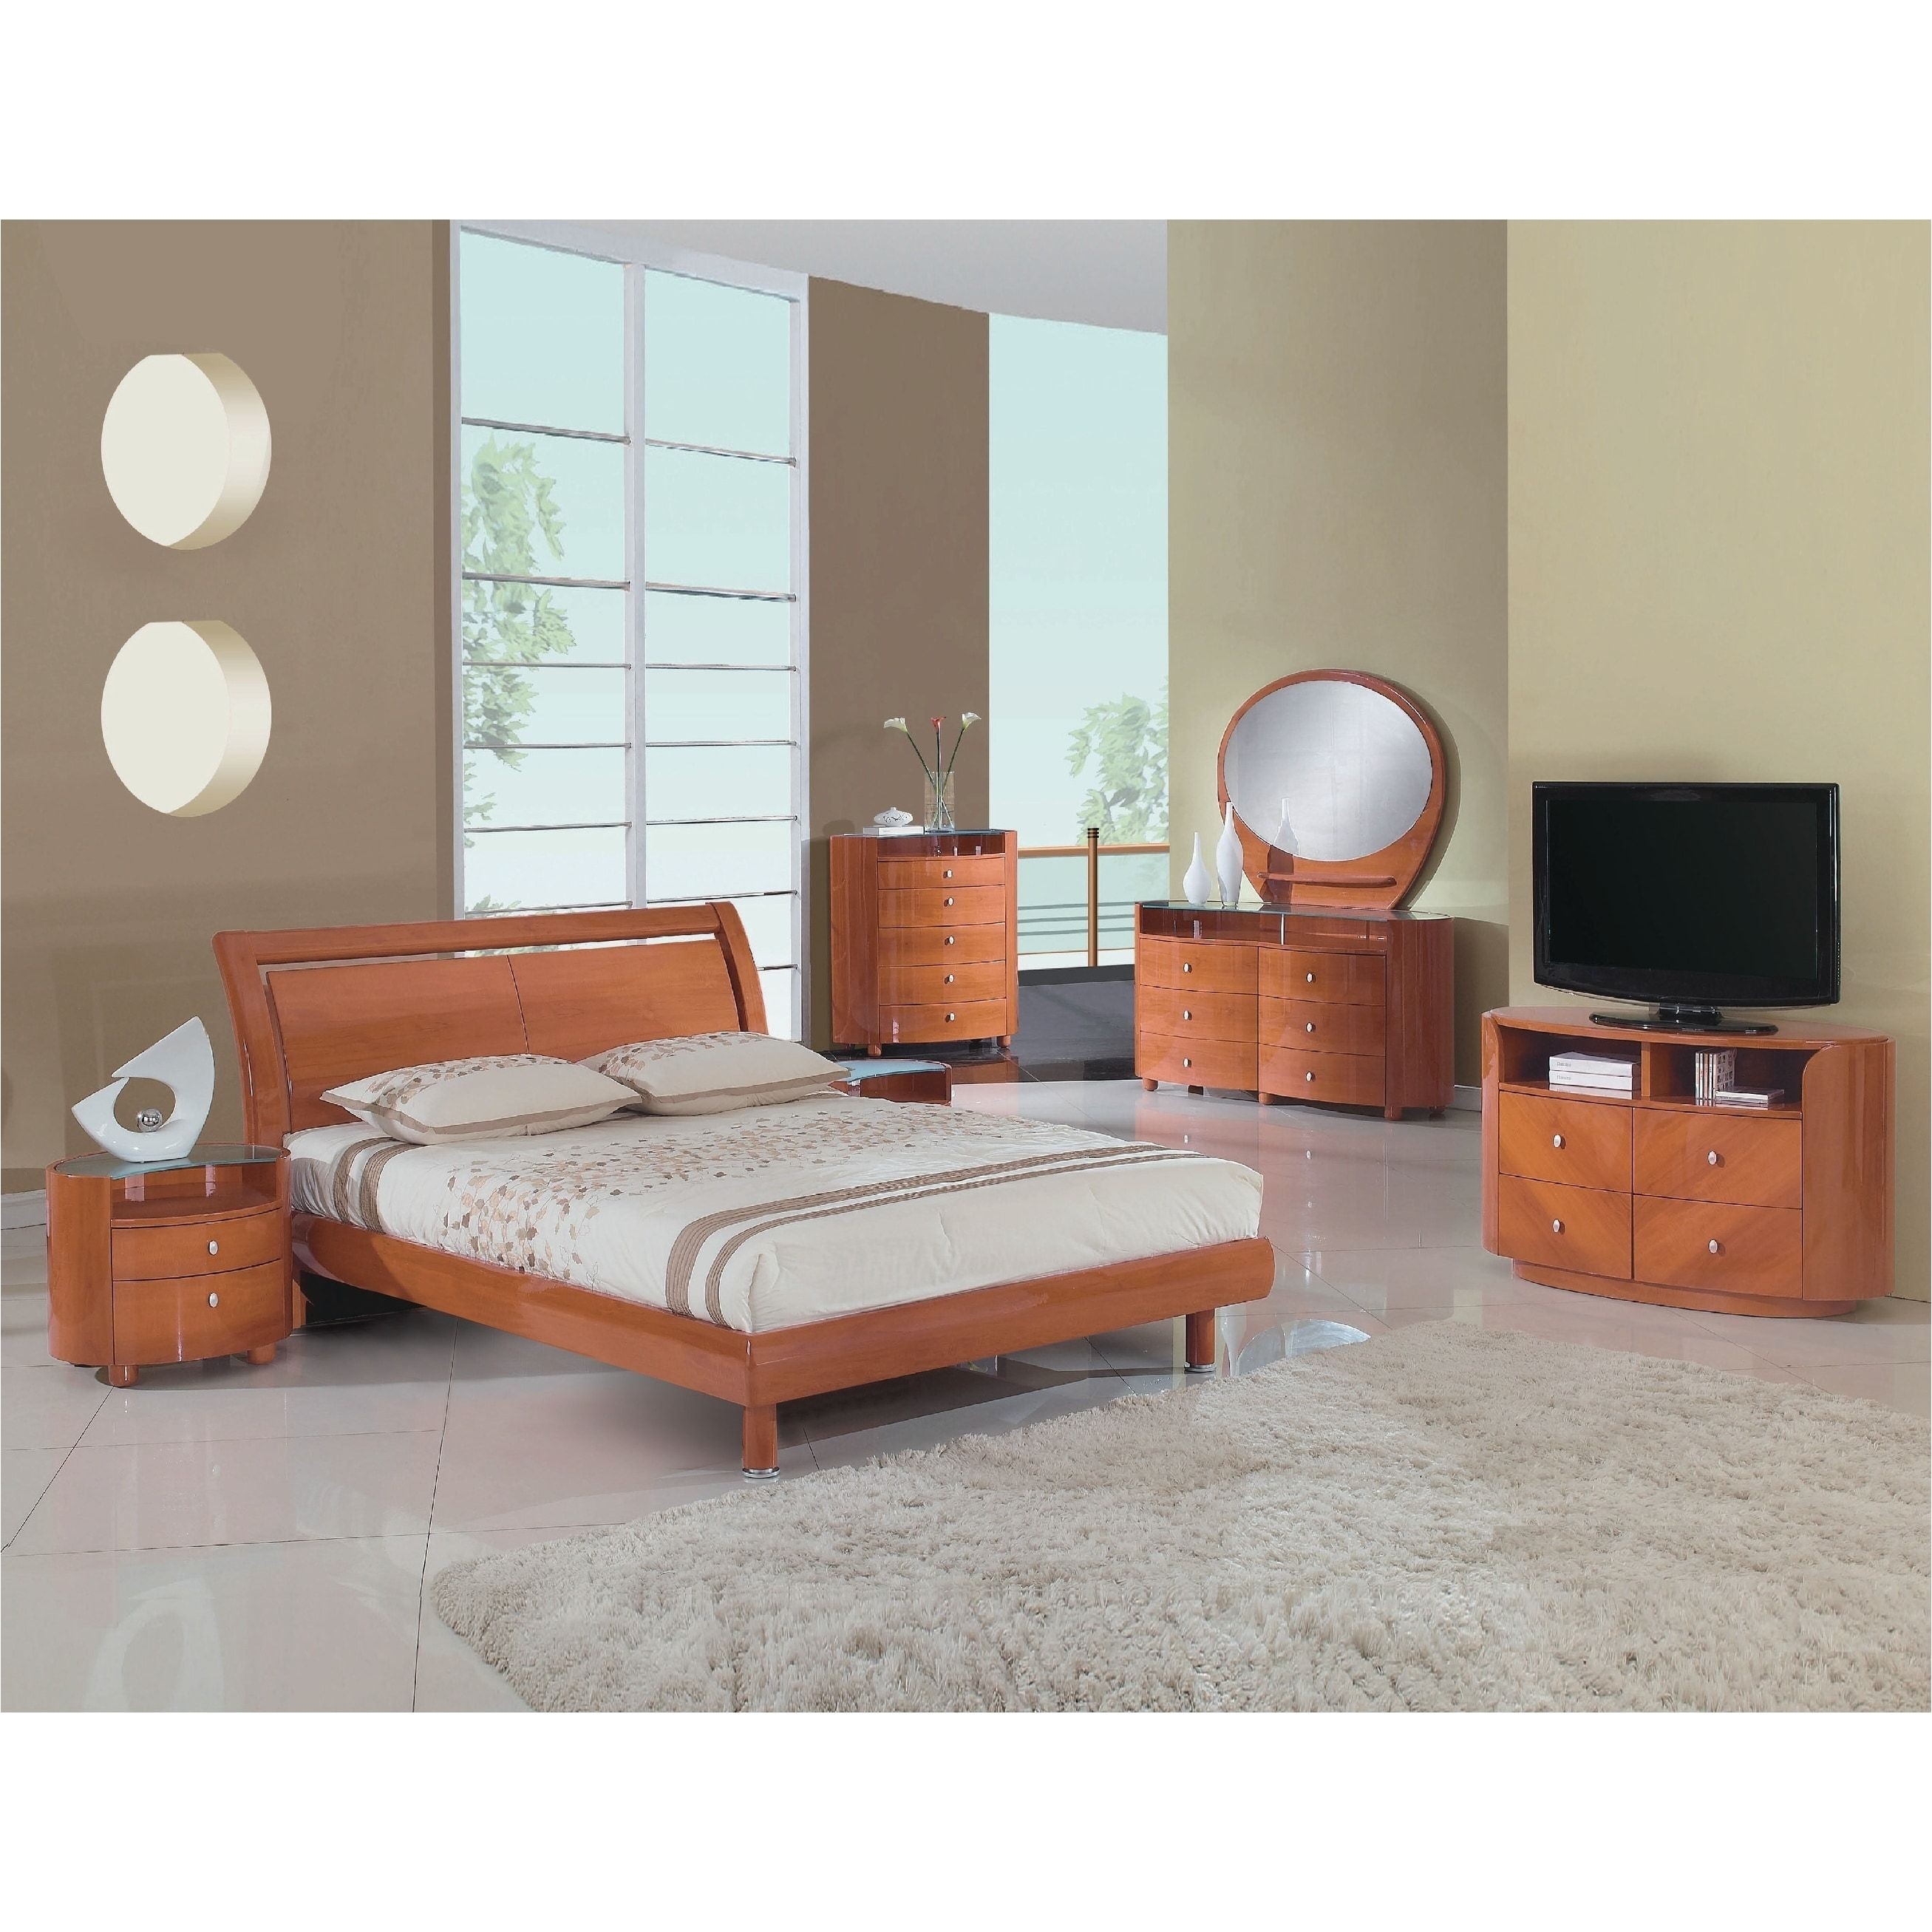 bewitching havertys discontinued bedroom furniture or brown bedroom set best vcf furniture 0d m8d